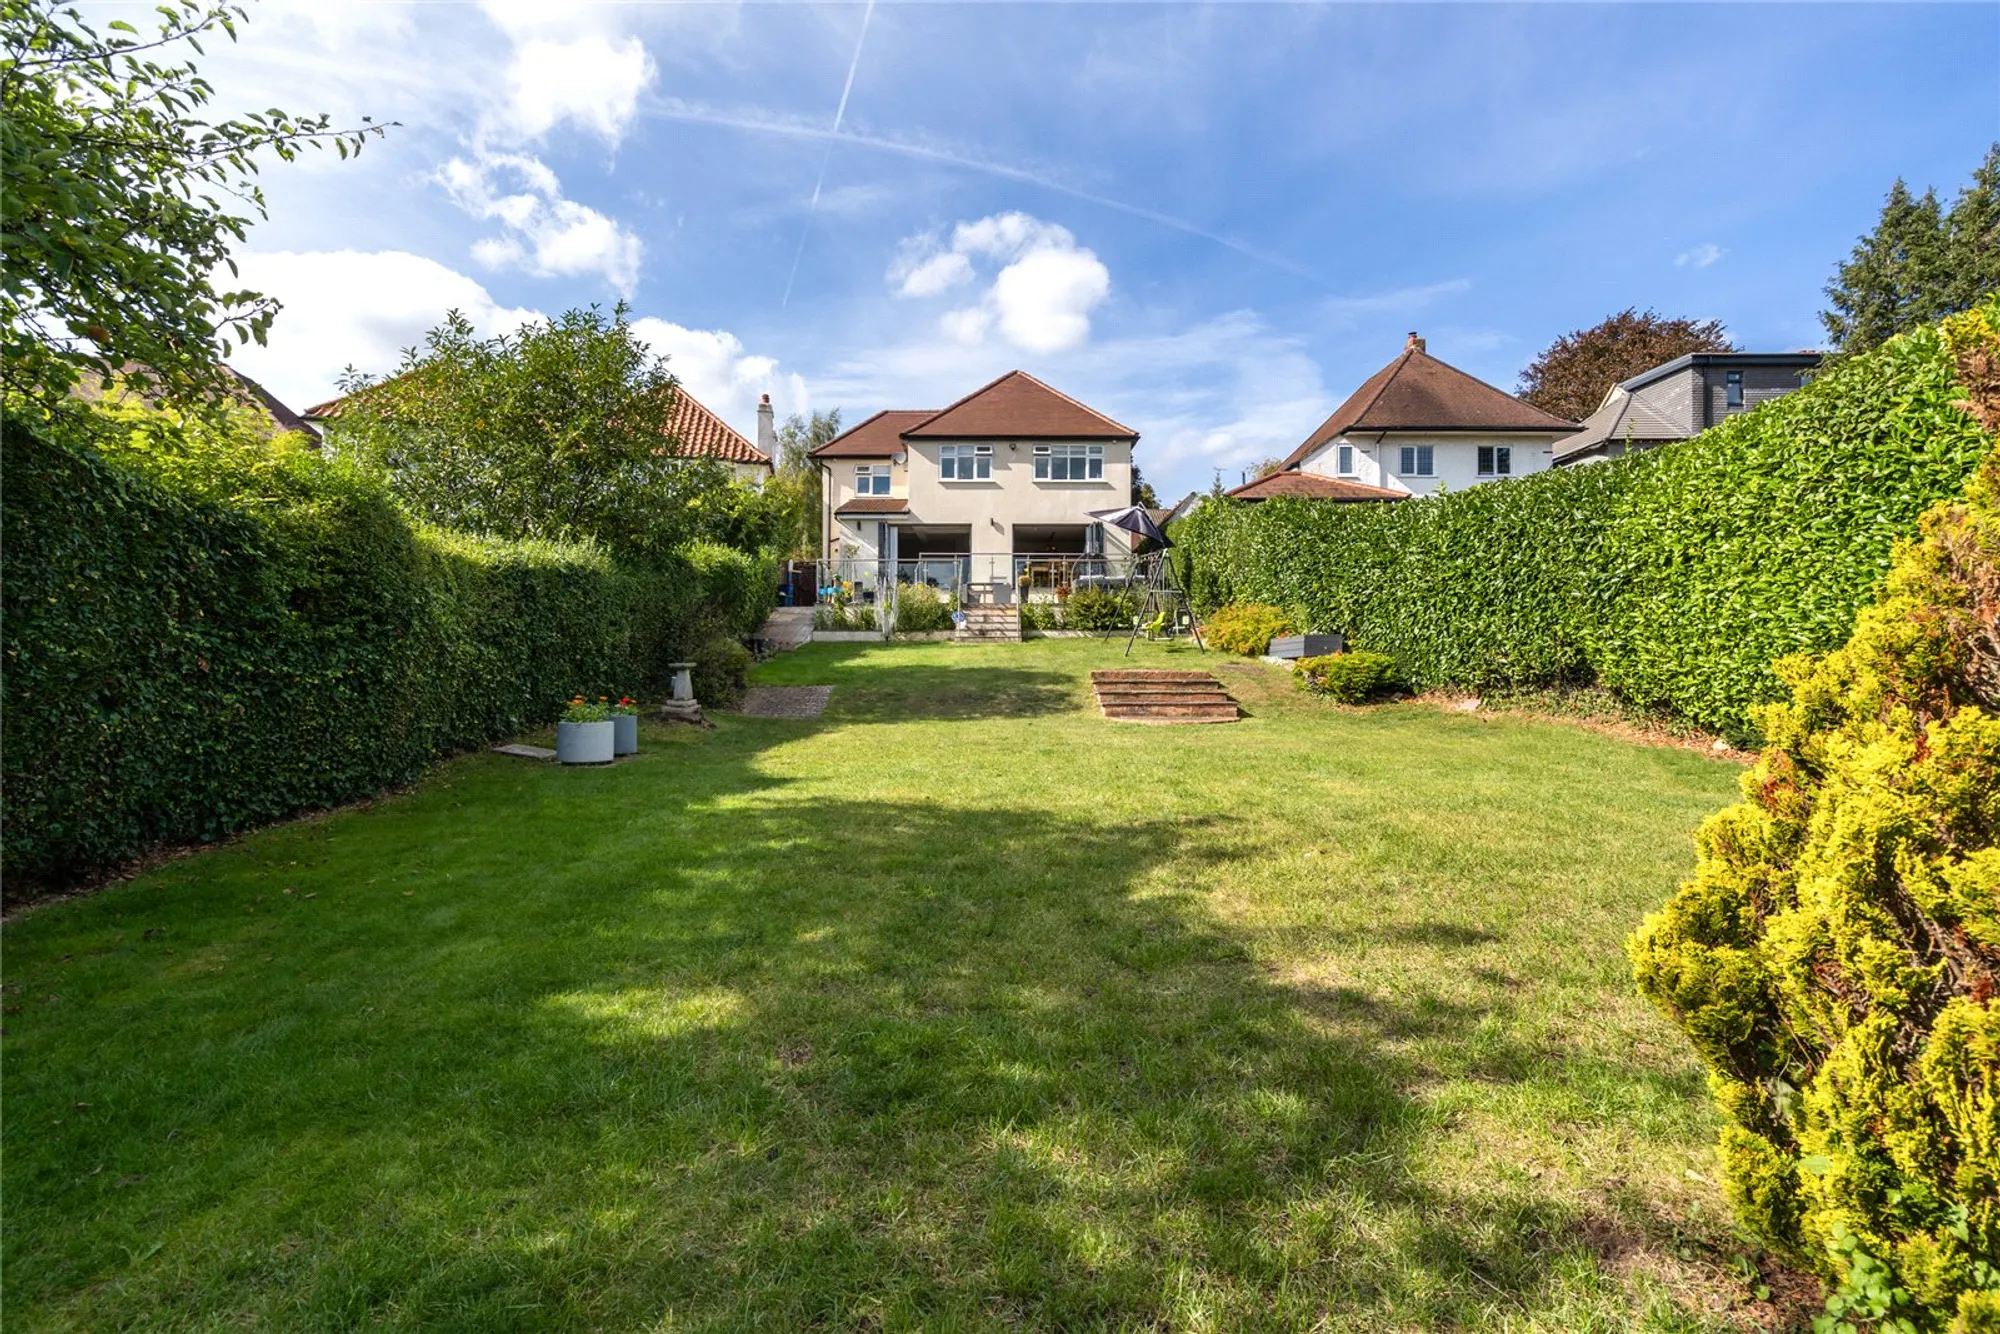 5 bed detached house for sale in Downlands Road, Purley - Property Image 1